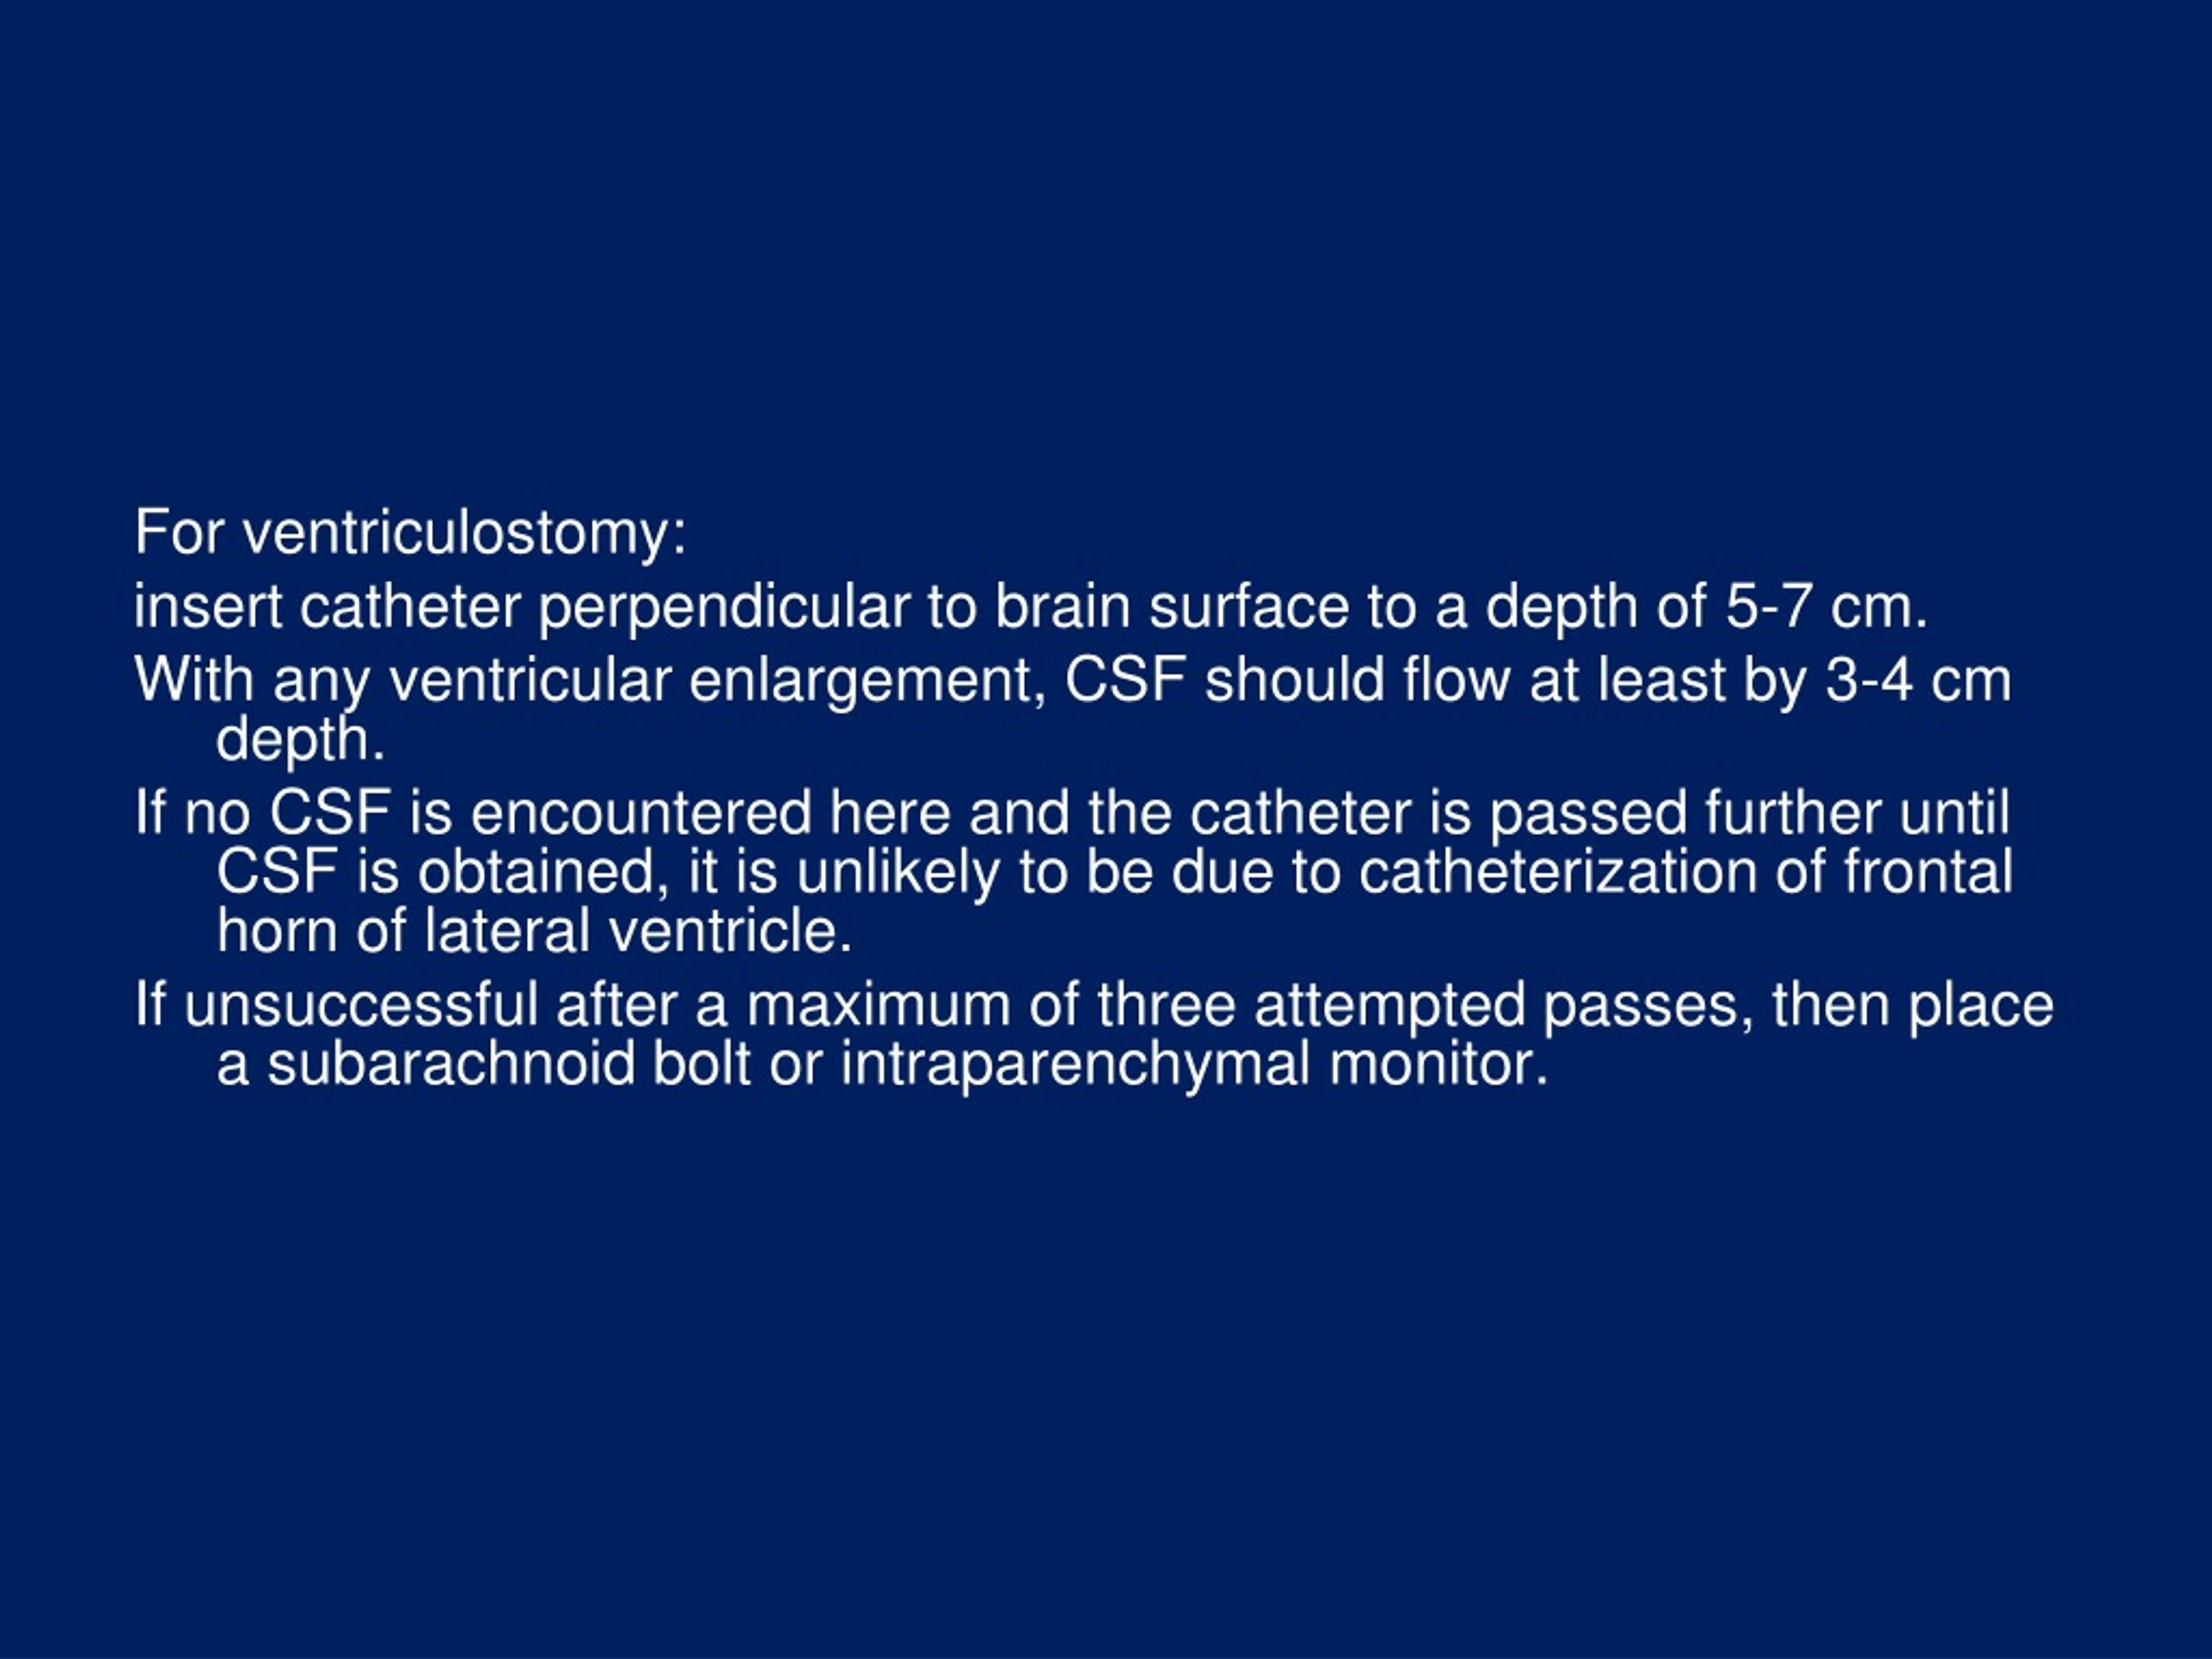 Ppt Hydrocephalus Ventriculo Peritoneal Shunt Powerpoint Presentation Id9224266 0672